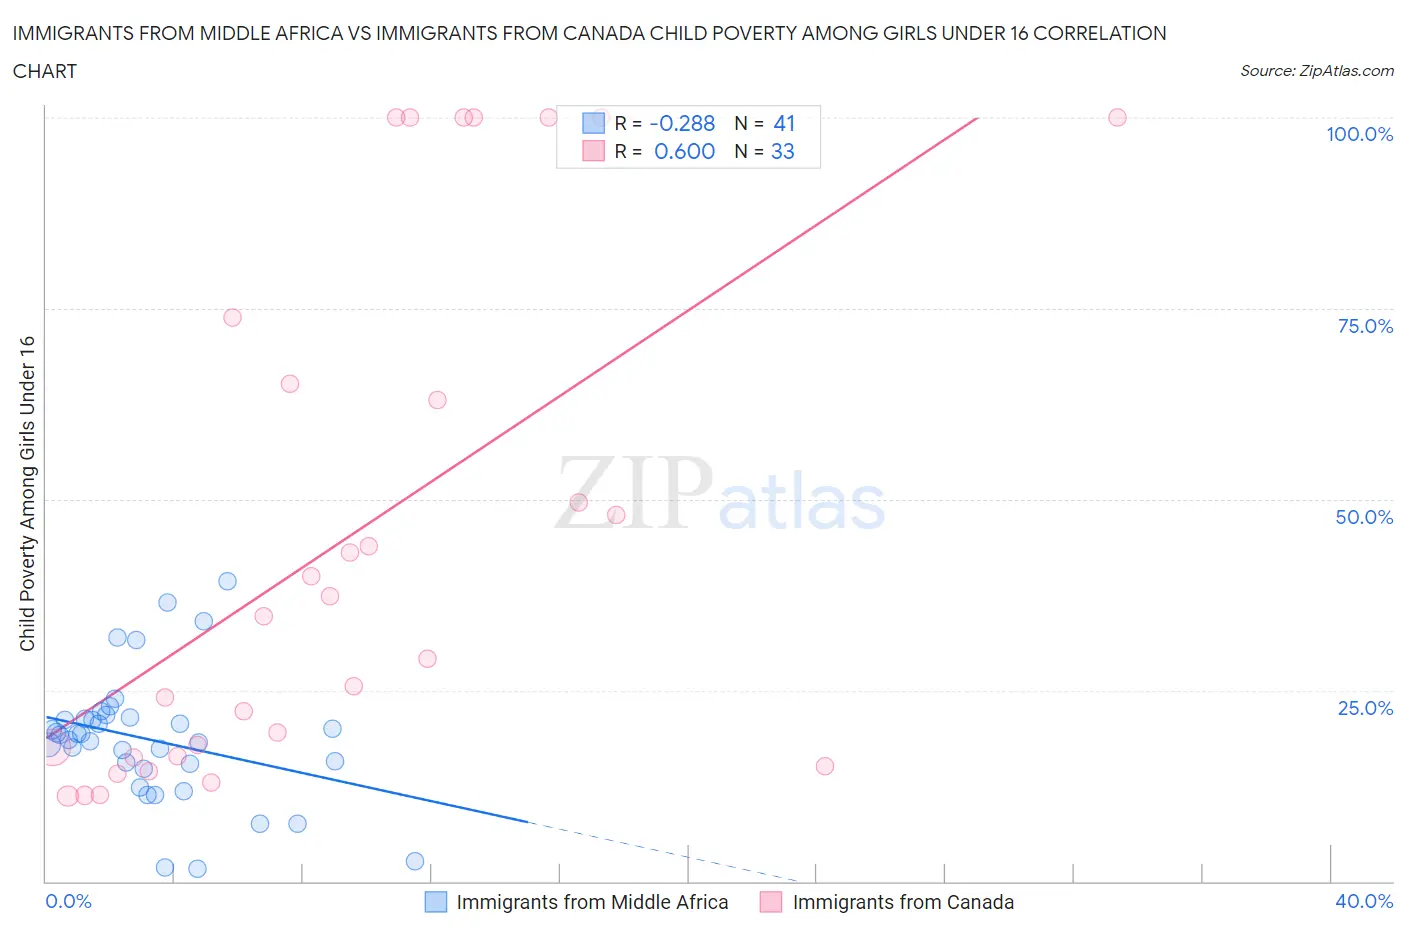 Immigrants from Middle Africa vs Immigrants from Canada Child Poverty Among Girls Under 16